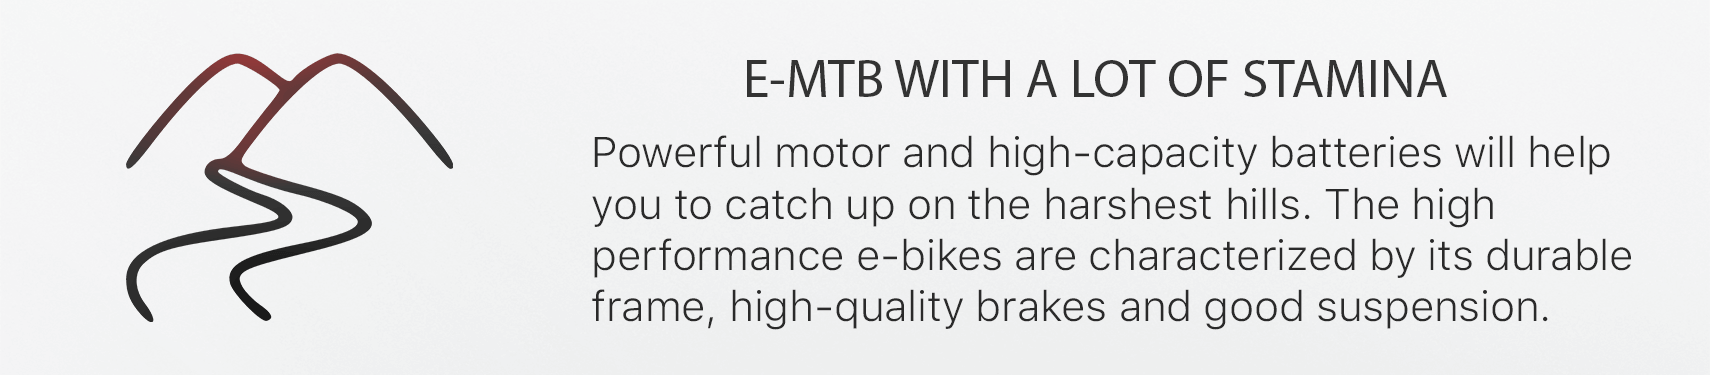 E-MTB WITH A LOT OF STAMIPowerful motor and high-capacity batteries will help  you to catch up on the harshest hills. The high  performance e-bikes are characterized by its durable  frame, high-quality brakes and good suspension.